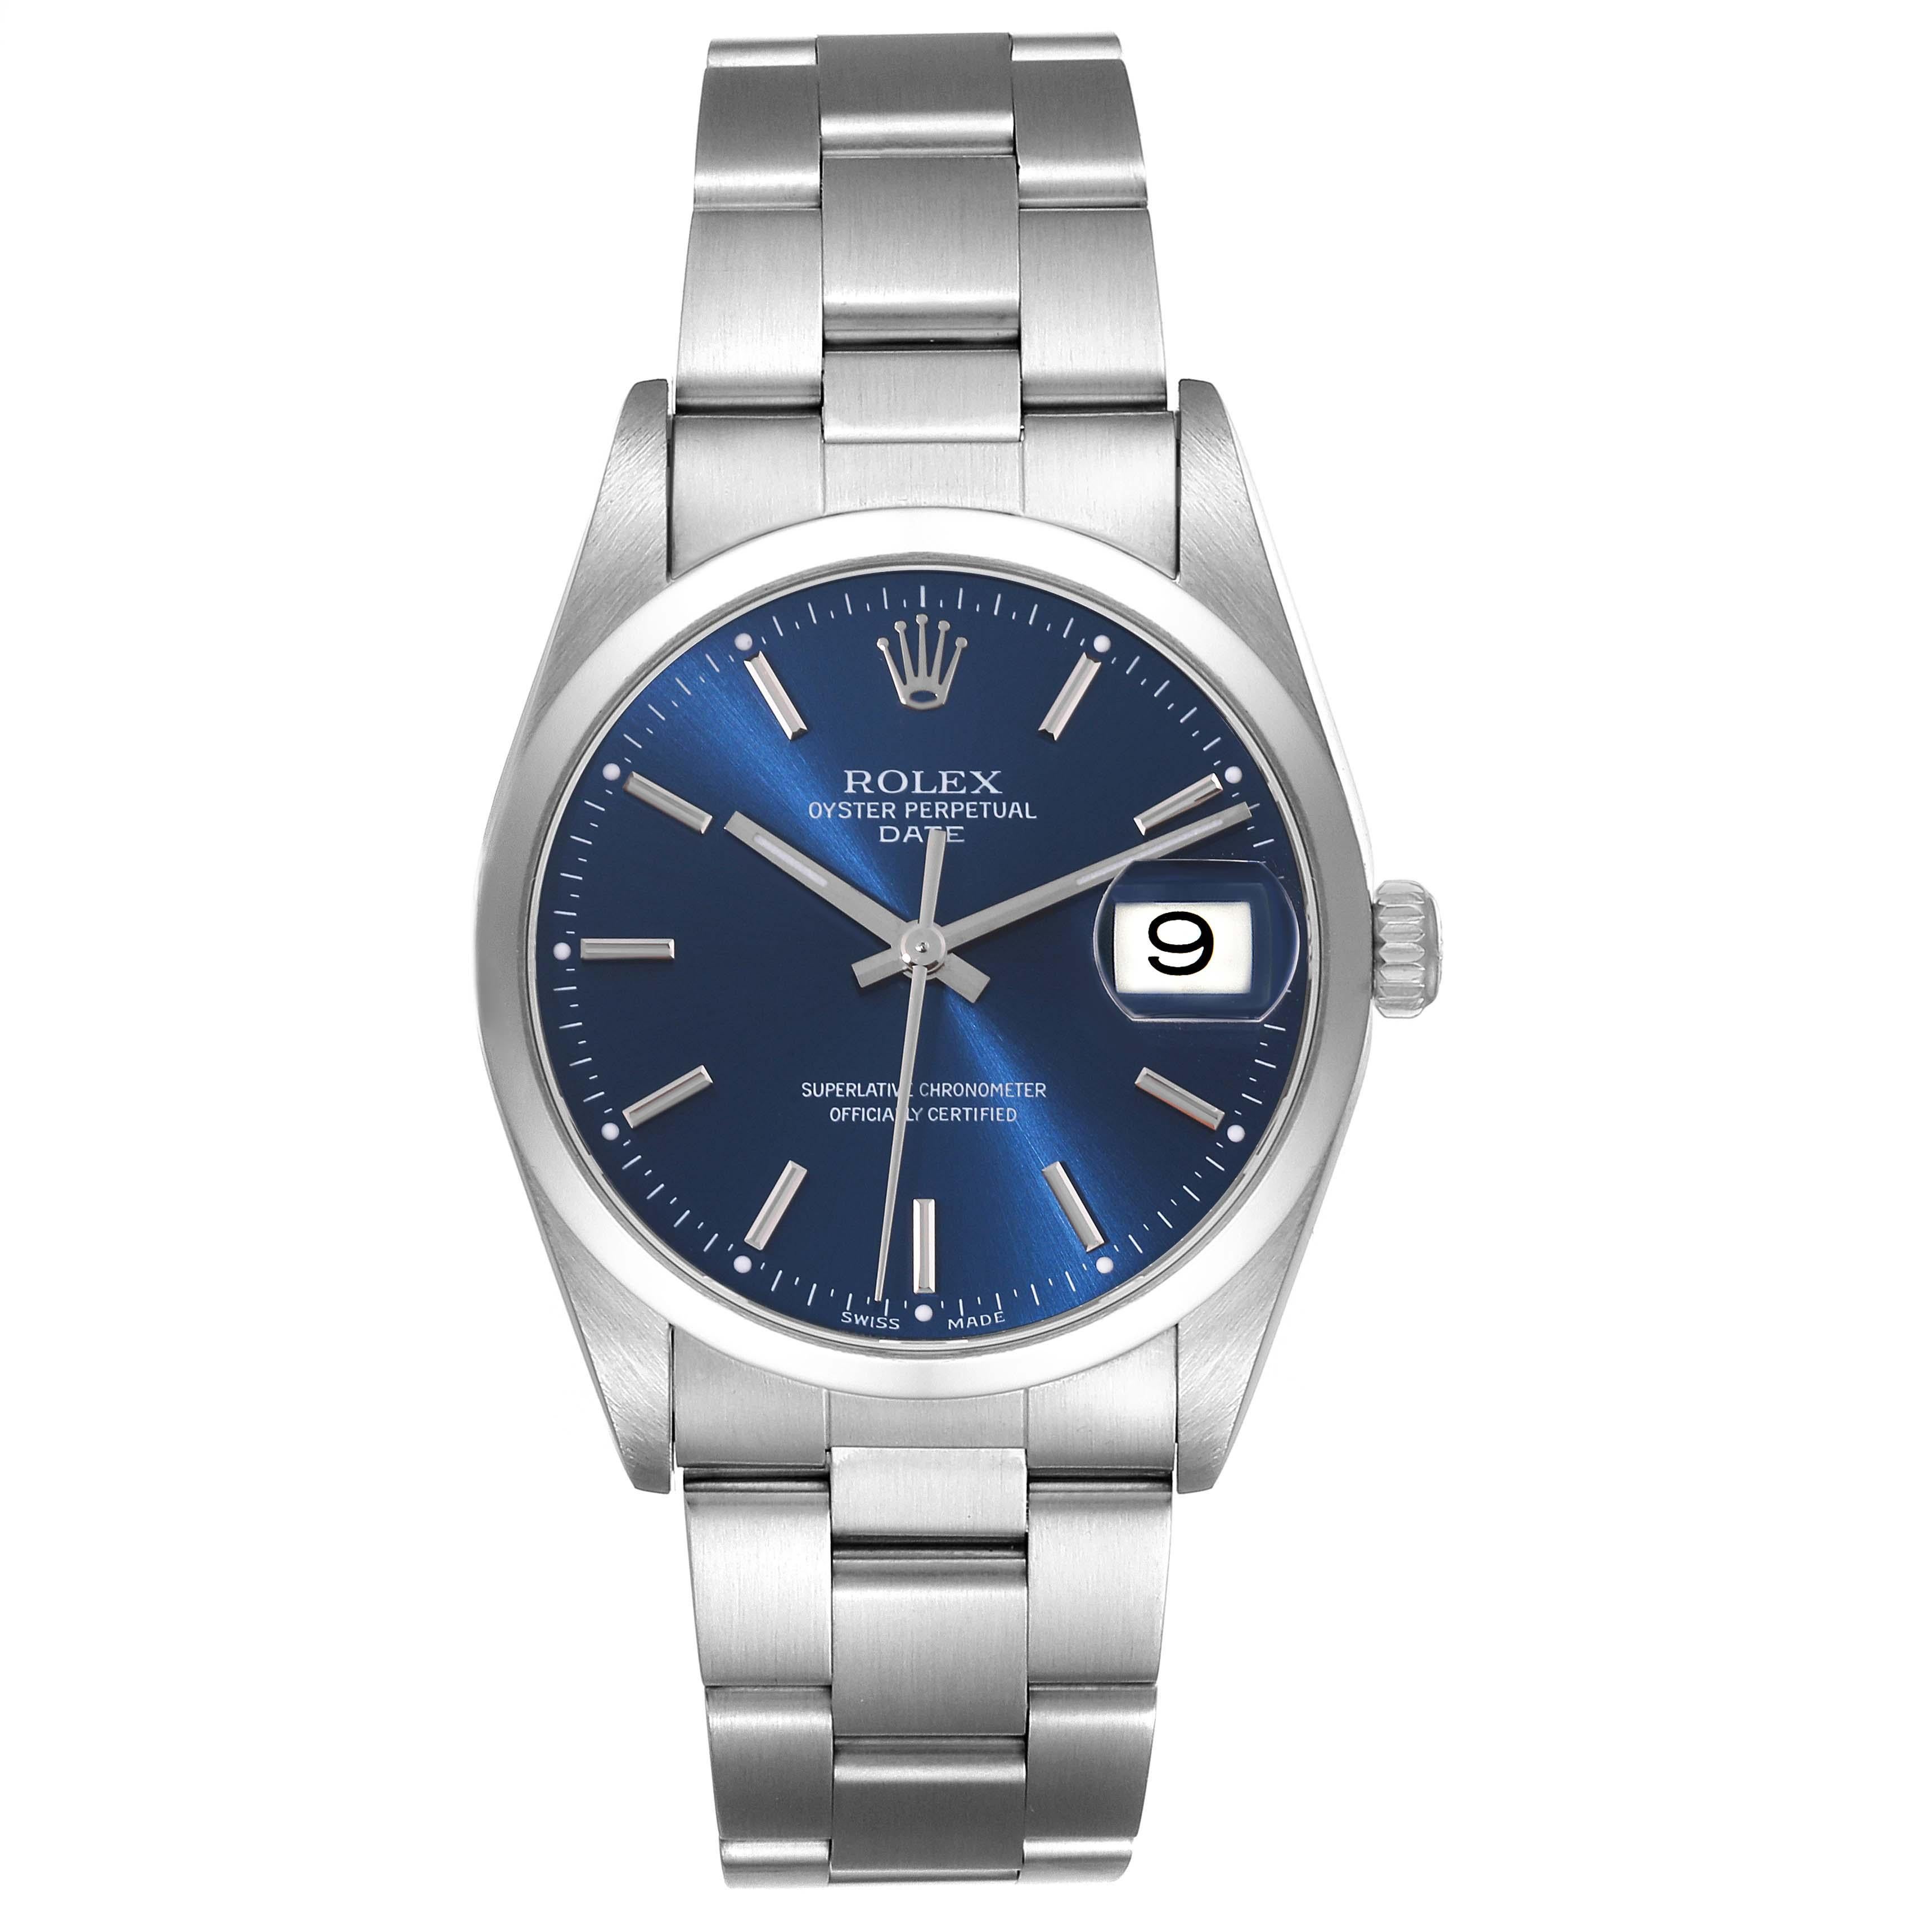 Rolex Date Blue Dial Smooth Bezel Steel Mens Watch 15200 Box Papers. Officially certified chronometer automatic self-winding movement. Stainless steel oyster case 34.0 mm in diameter. Rolex logo on the crown. Stainless steel smooth bezel. Scratch